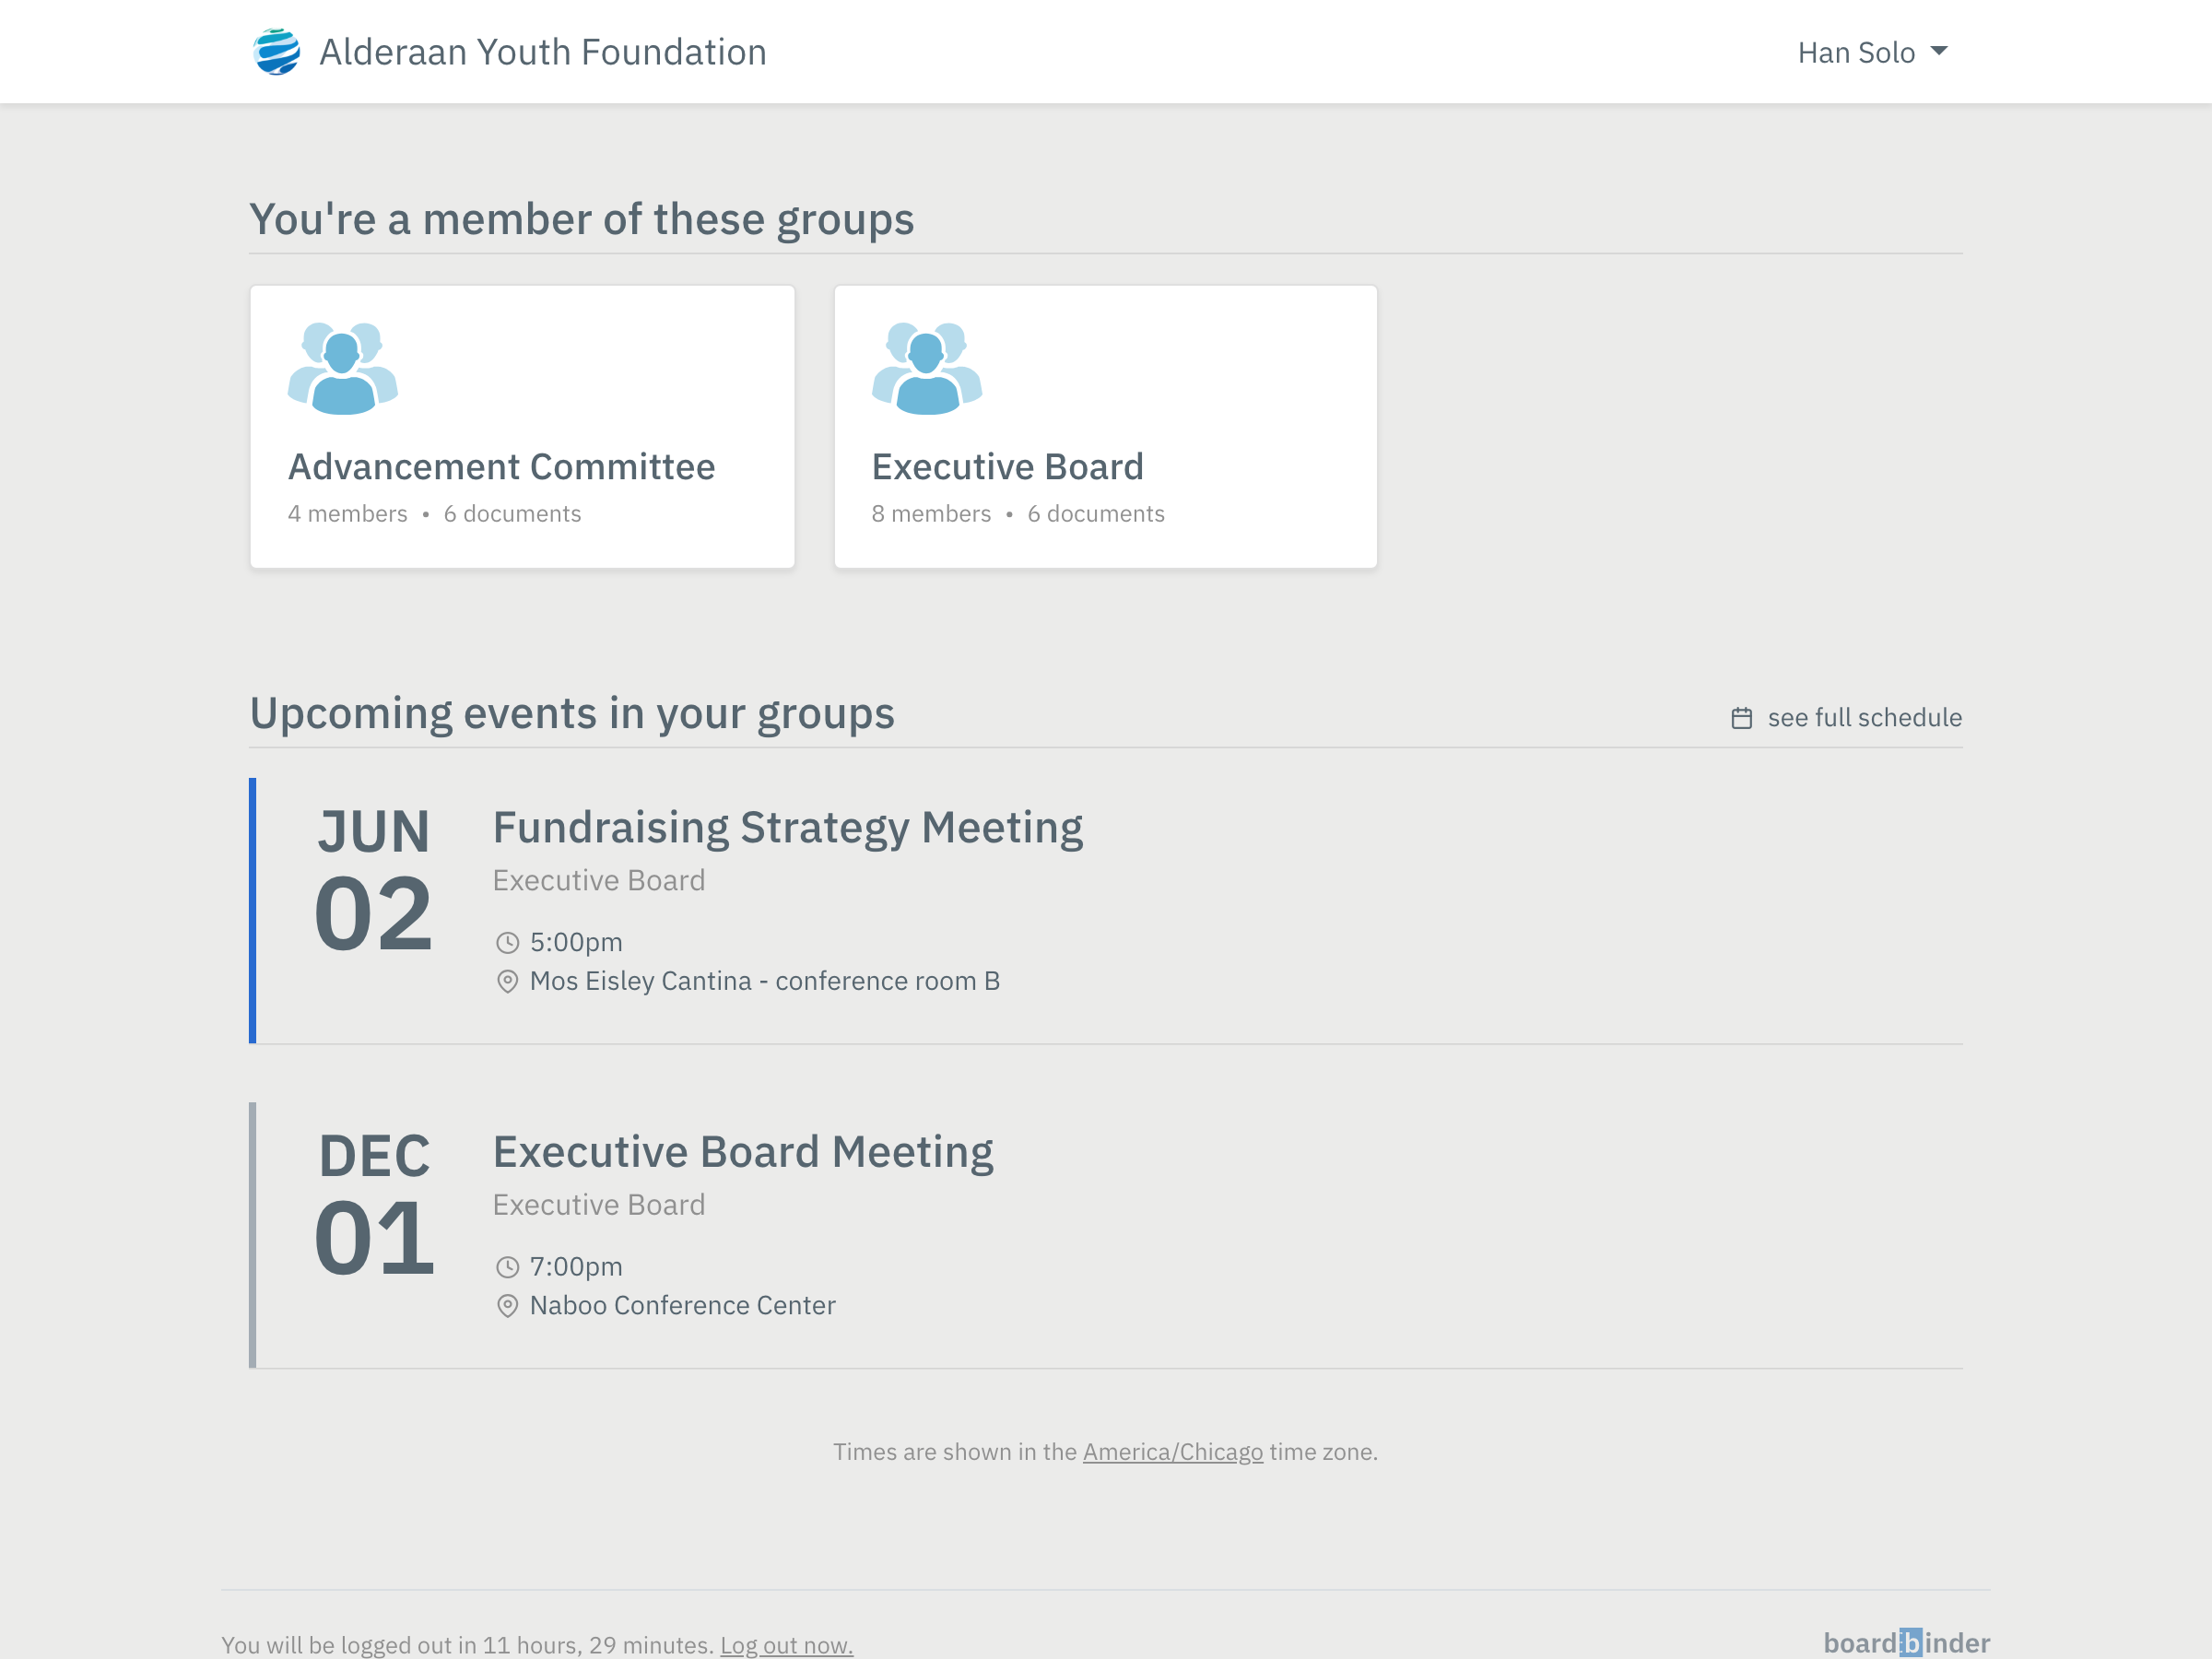 Meeting events and documents in BoardBinder